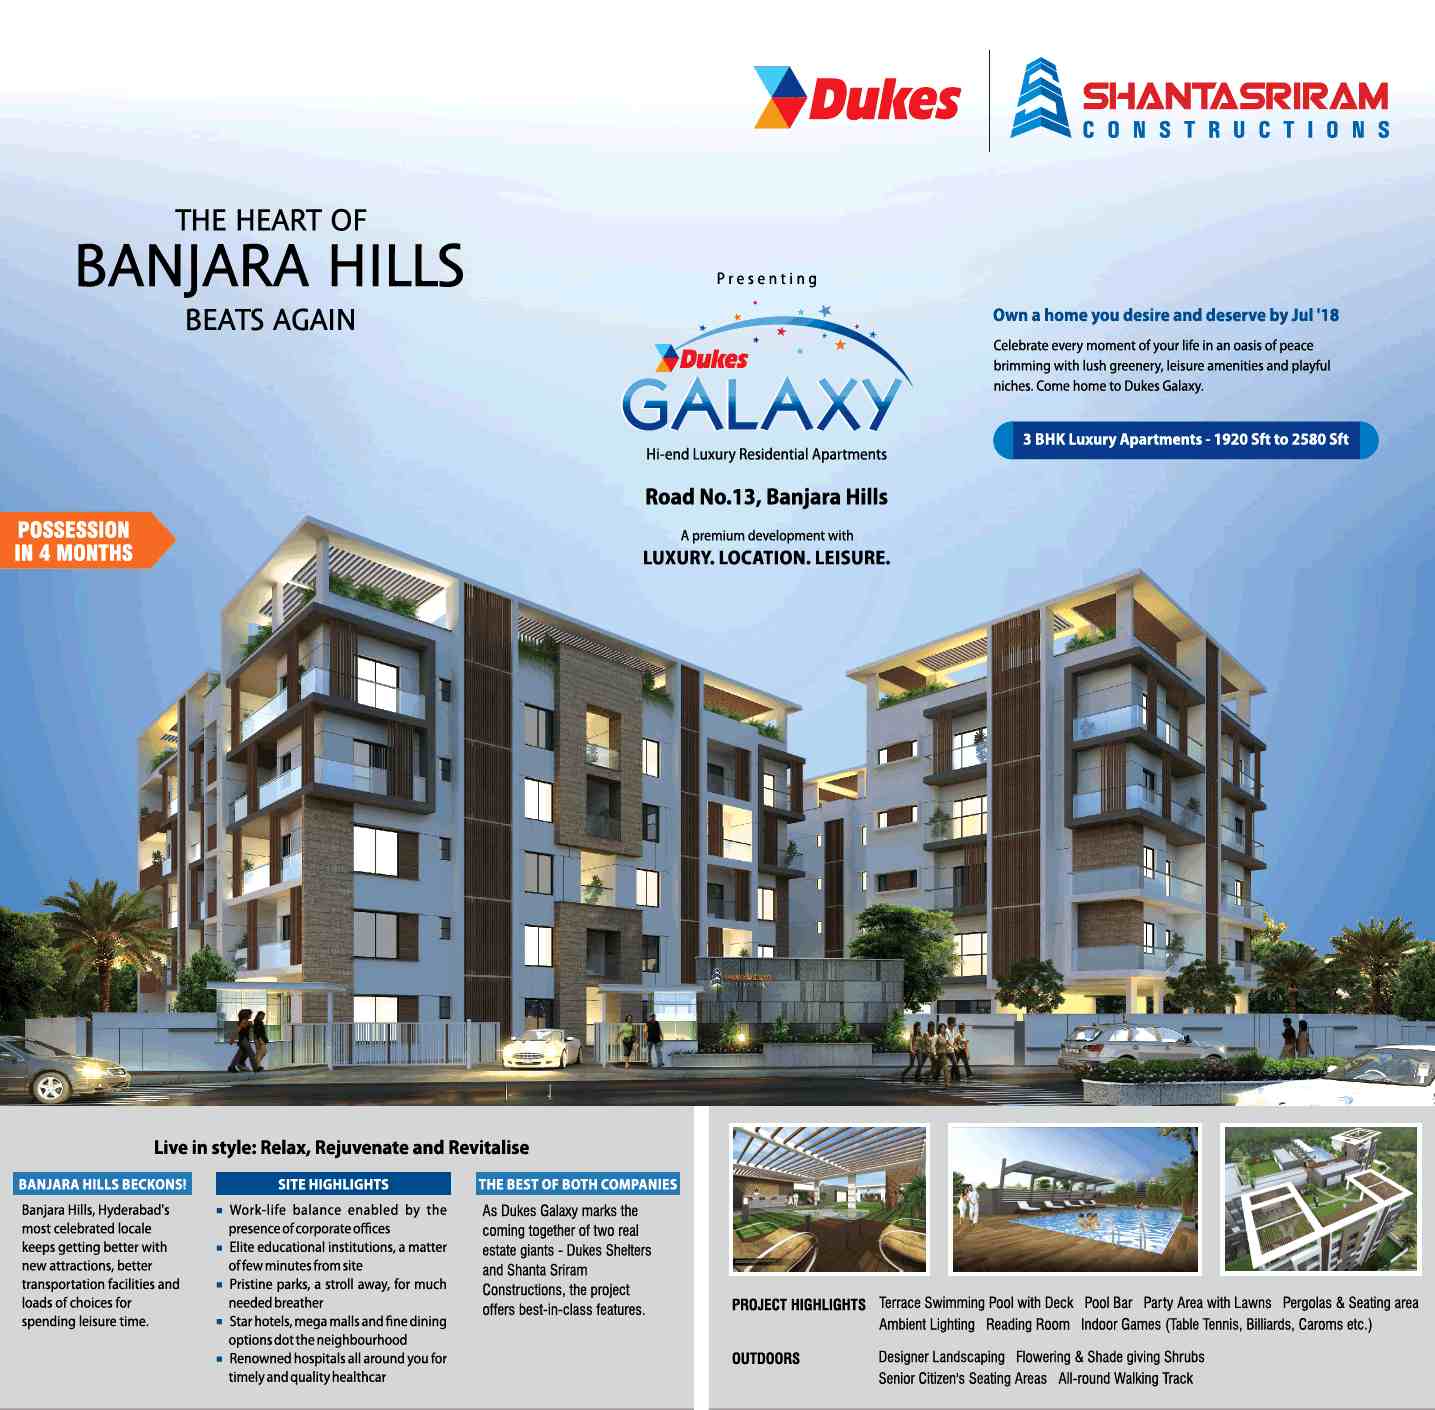 Own a home you desire and deserve at Shanta Sriram Dukes Galaxy in Hyderabad